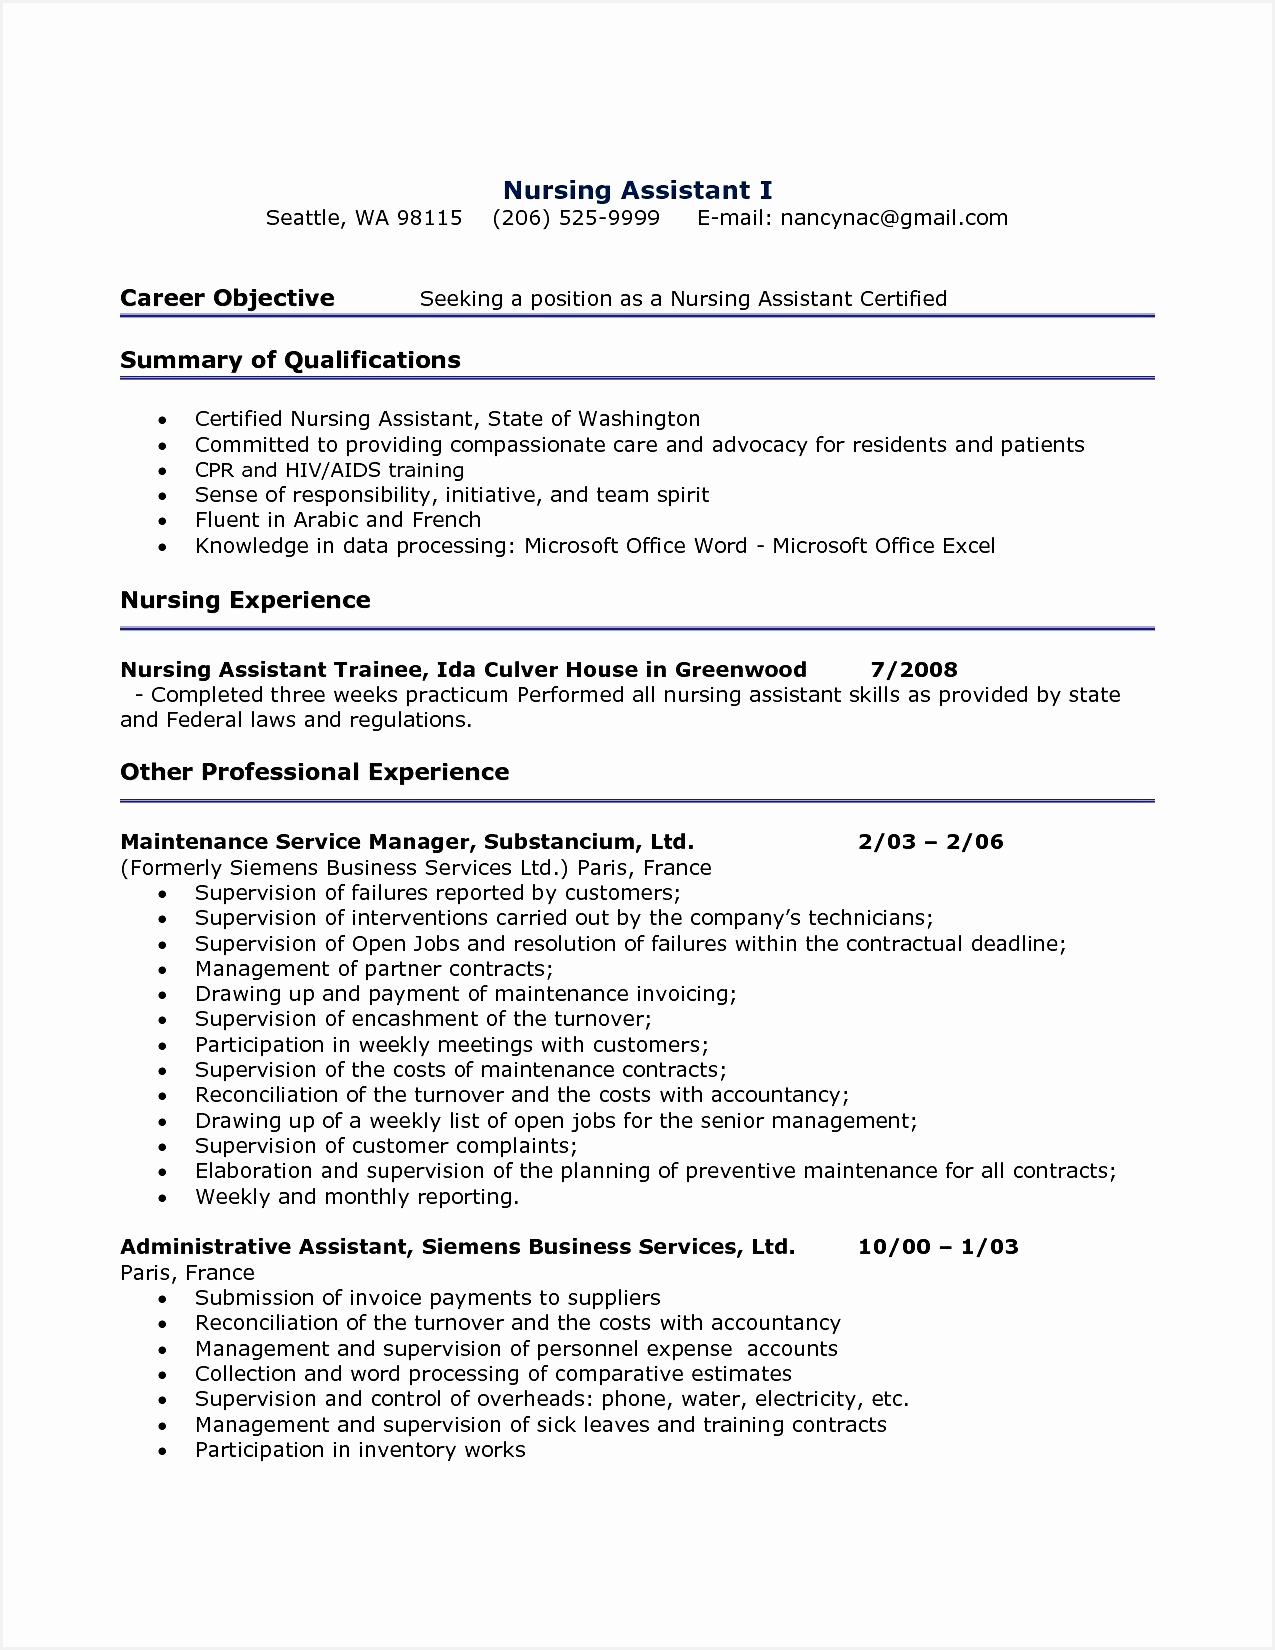 Free Resume format New Lovely Pr Resume Template Elegant Dictionary Template 0d Archives Free Resume16501275